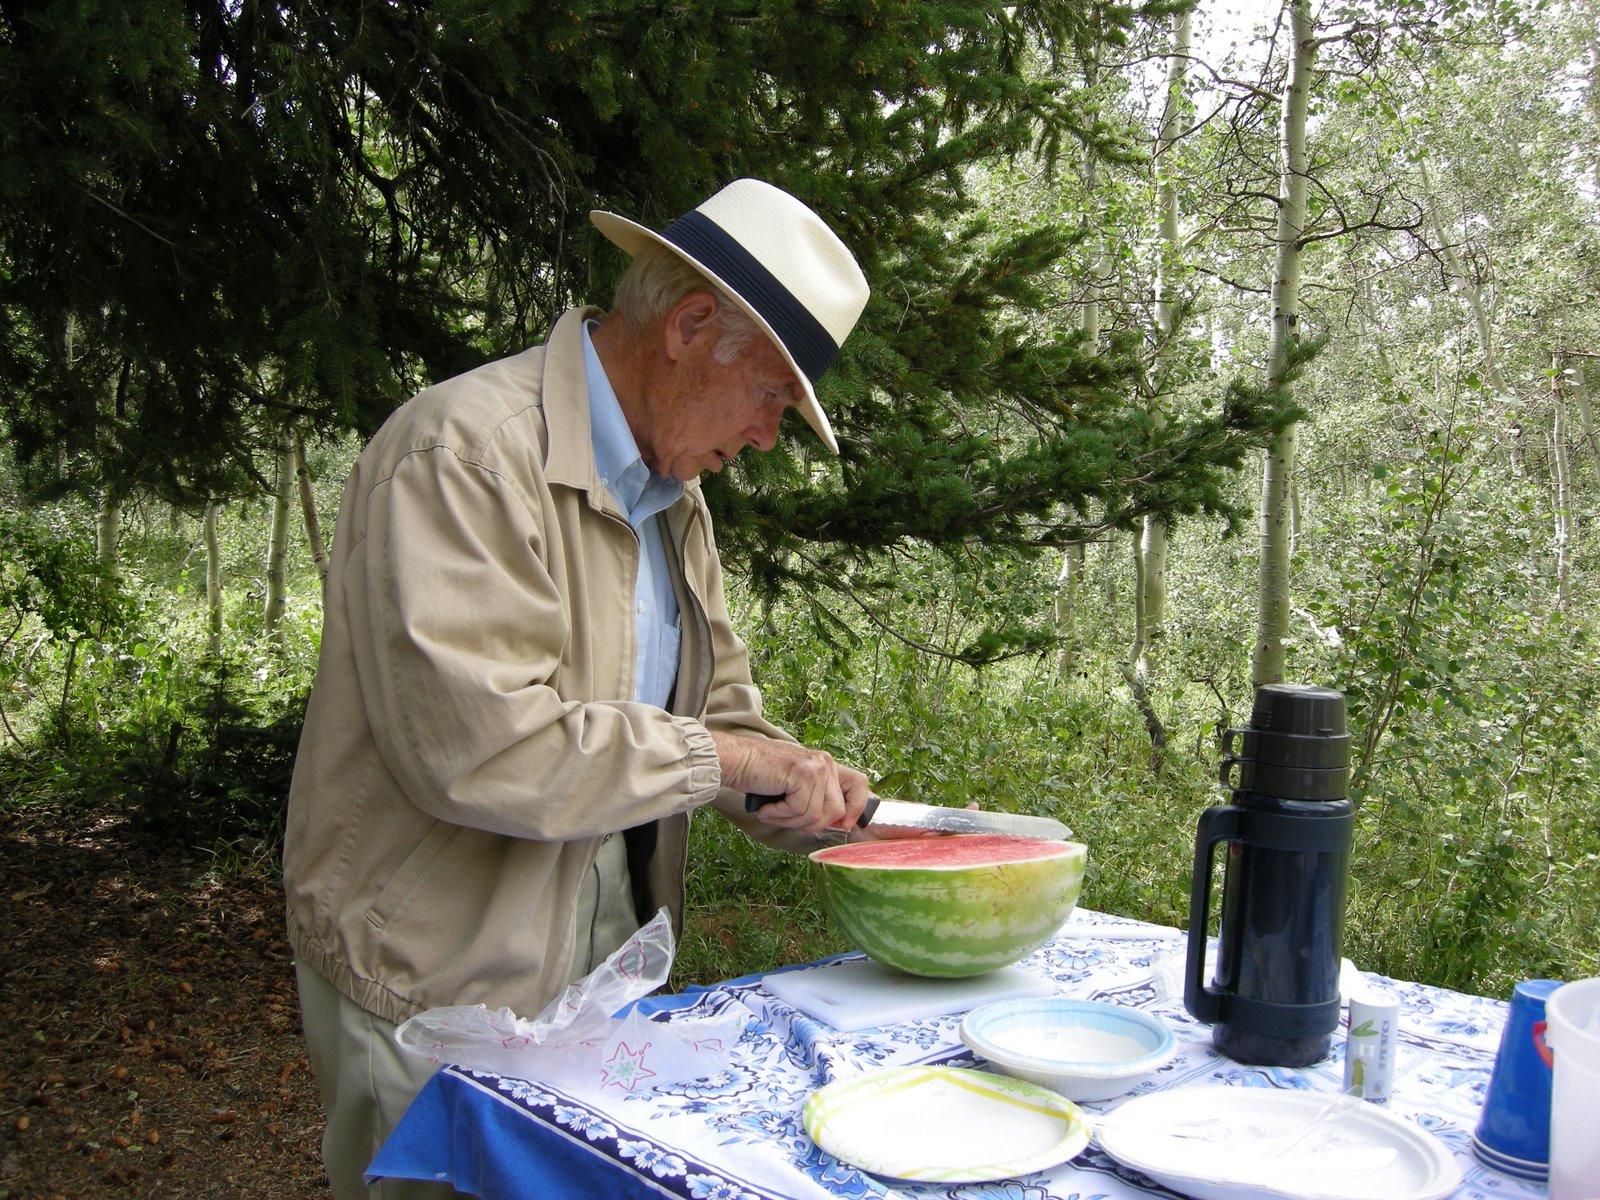 [Dad+and+watermelon.jpg]